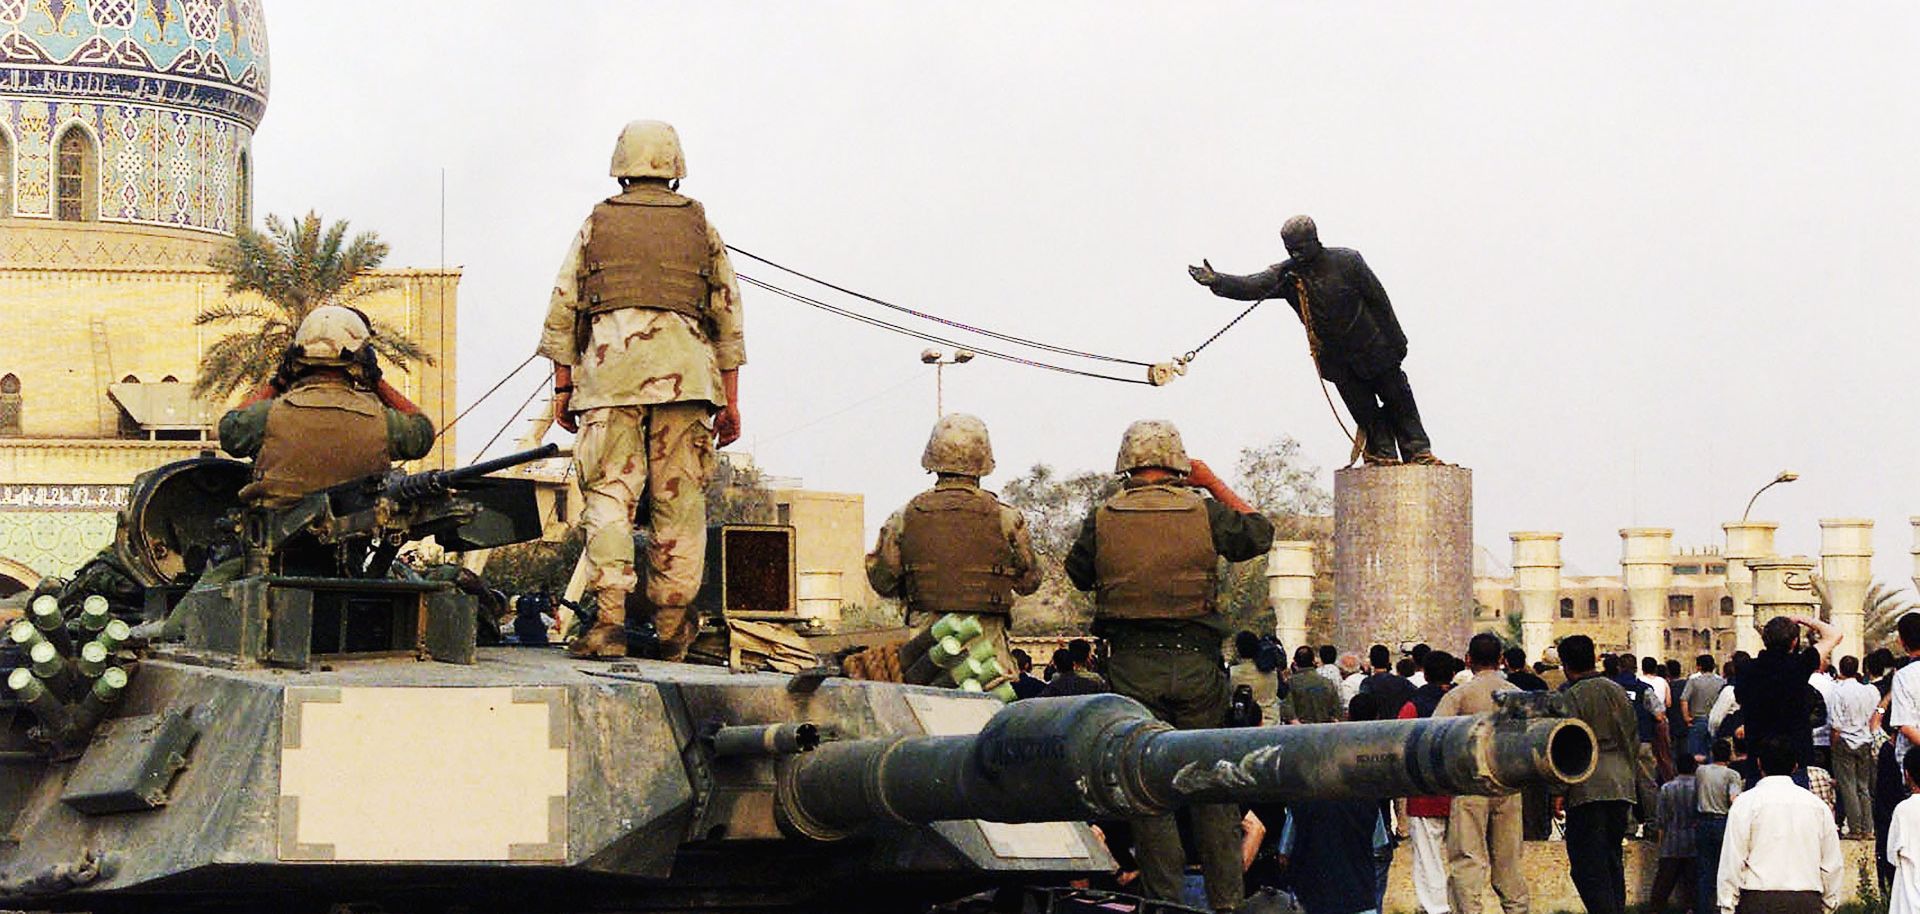 U.S marines and Iraqis are seen on April 9, 2003 as the statue of Iraqi dictator Saddam Hussein is toppled at al-Fardous square in Baghdad, Iraq. The third year anniversary since the overthrow of Saddam Hussein will be marked on April 9, 2006 amidst continued unrest in Iraq, where over 30, 000 civilians have been reported to be killed since the start of the war.